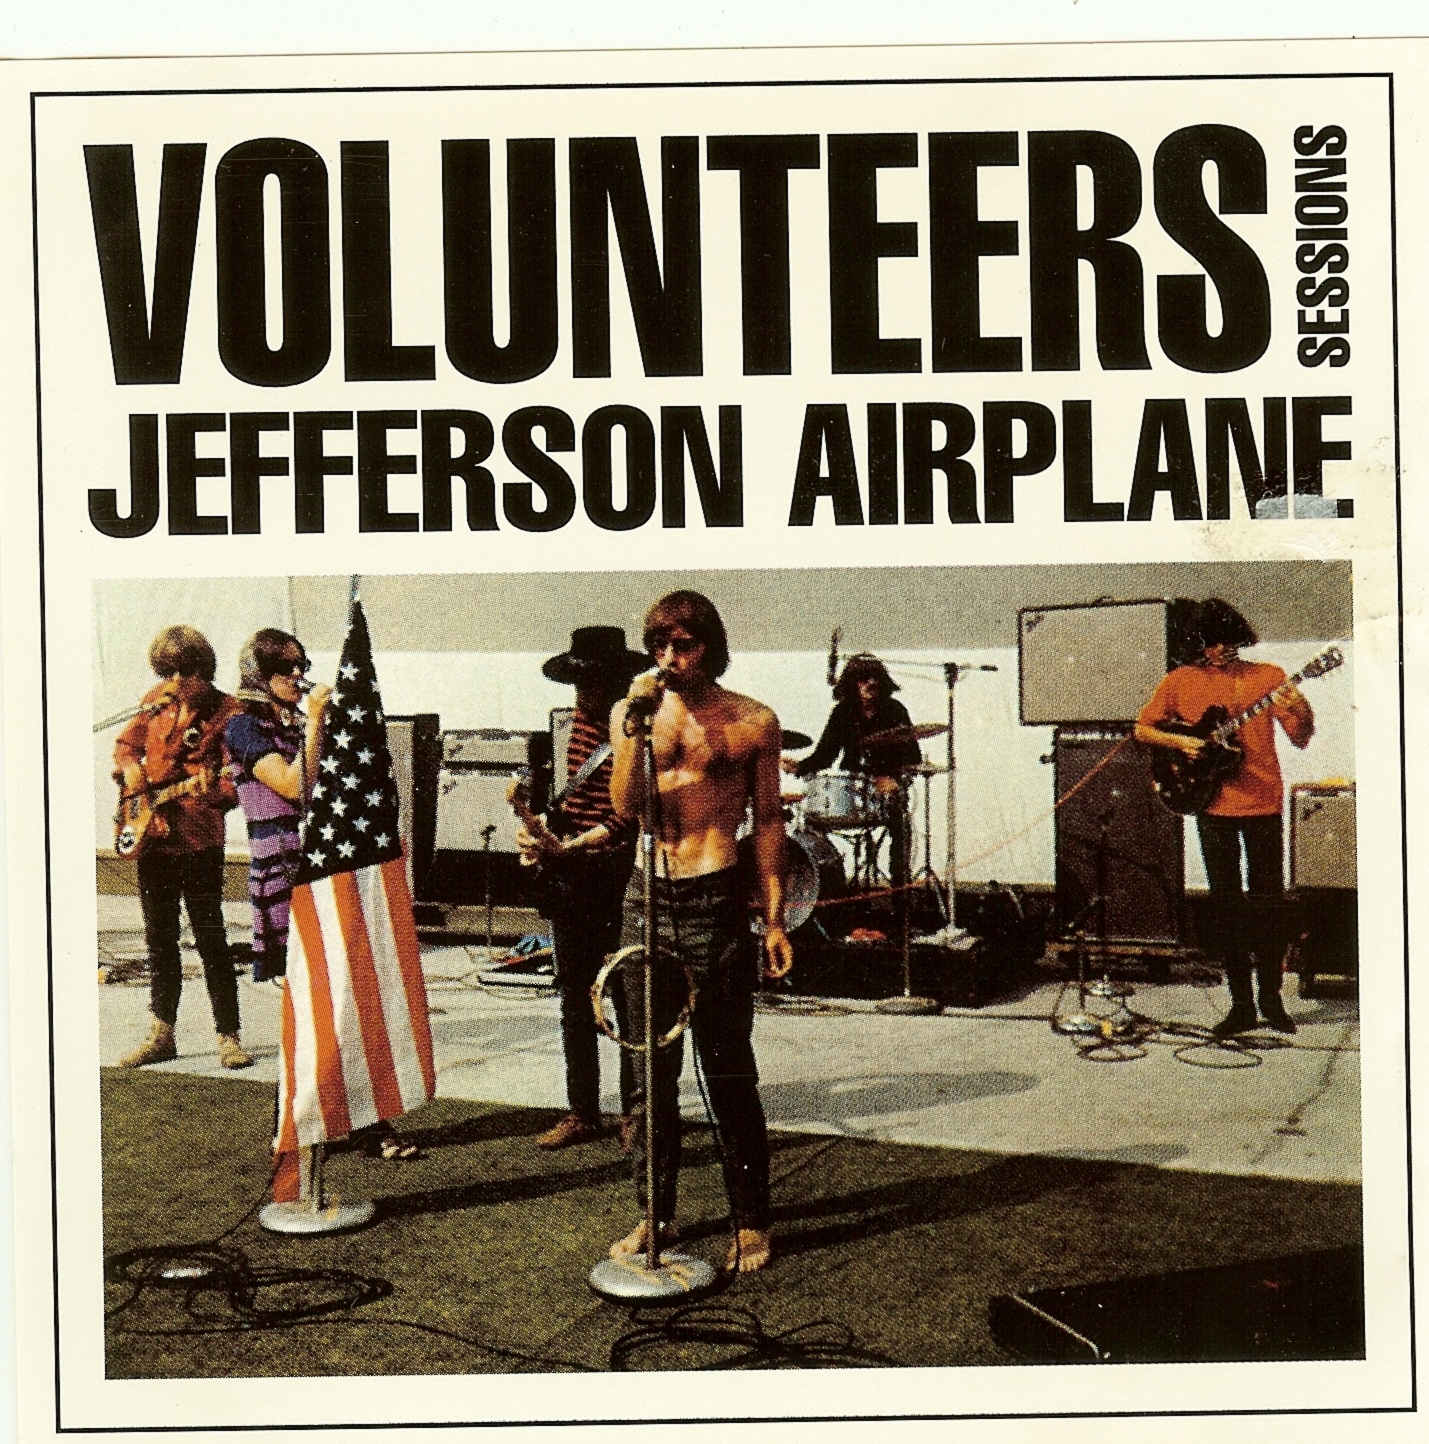 An Envelope Artist of The Day Jefferson Airplane